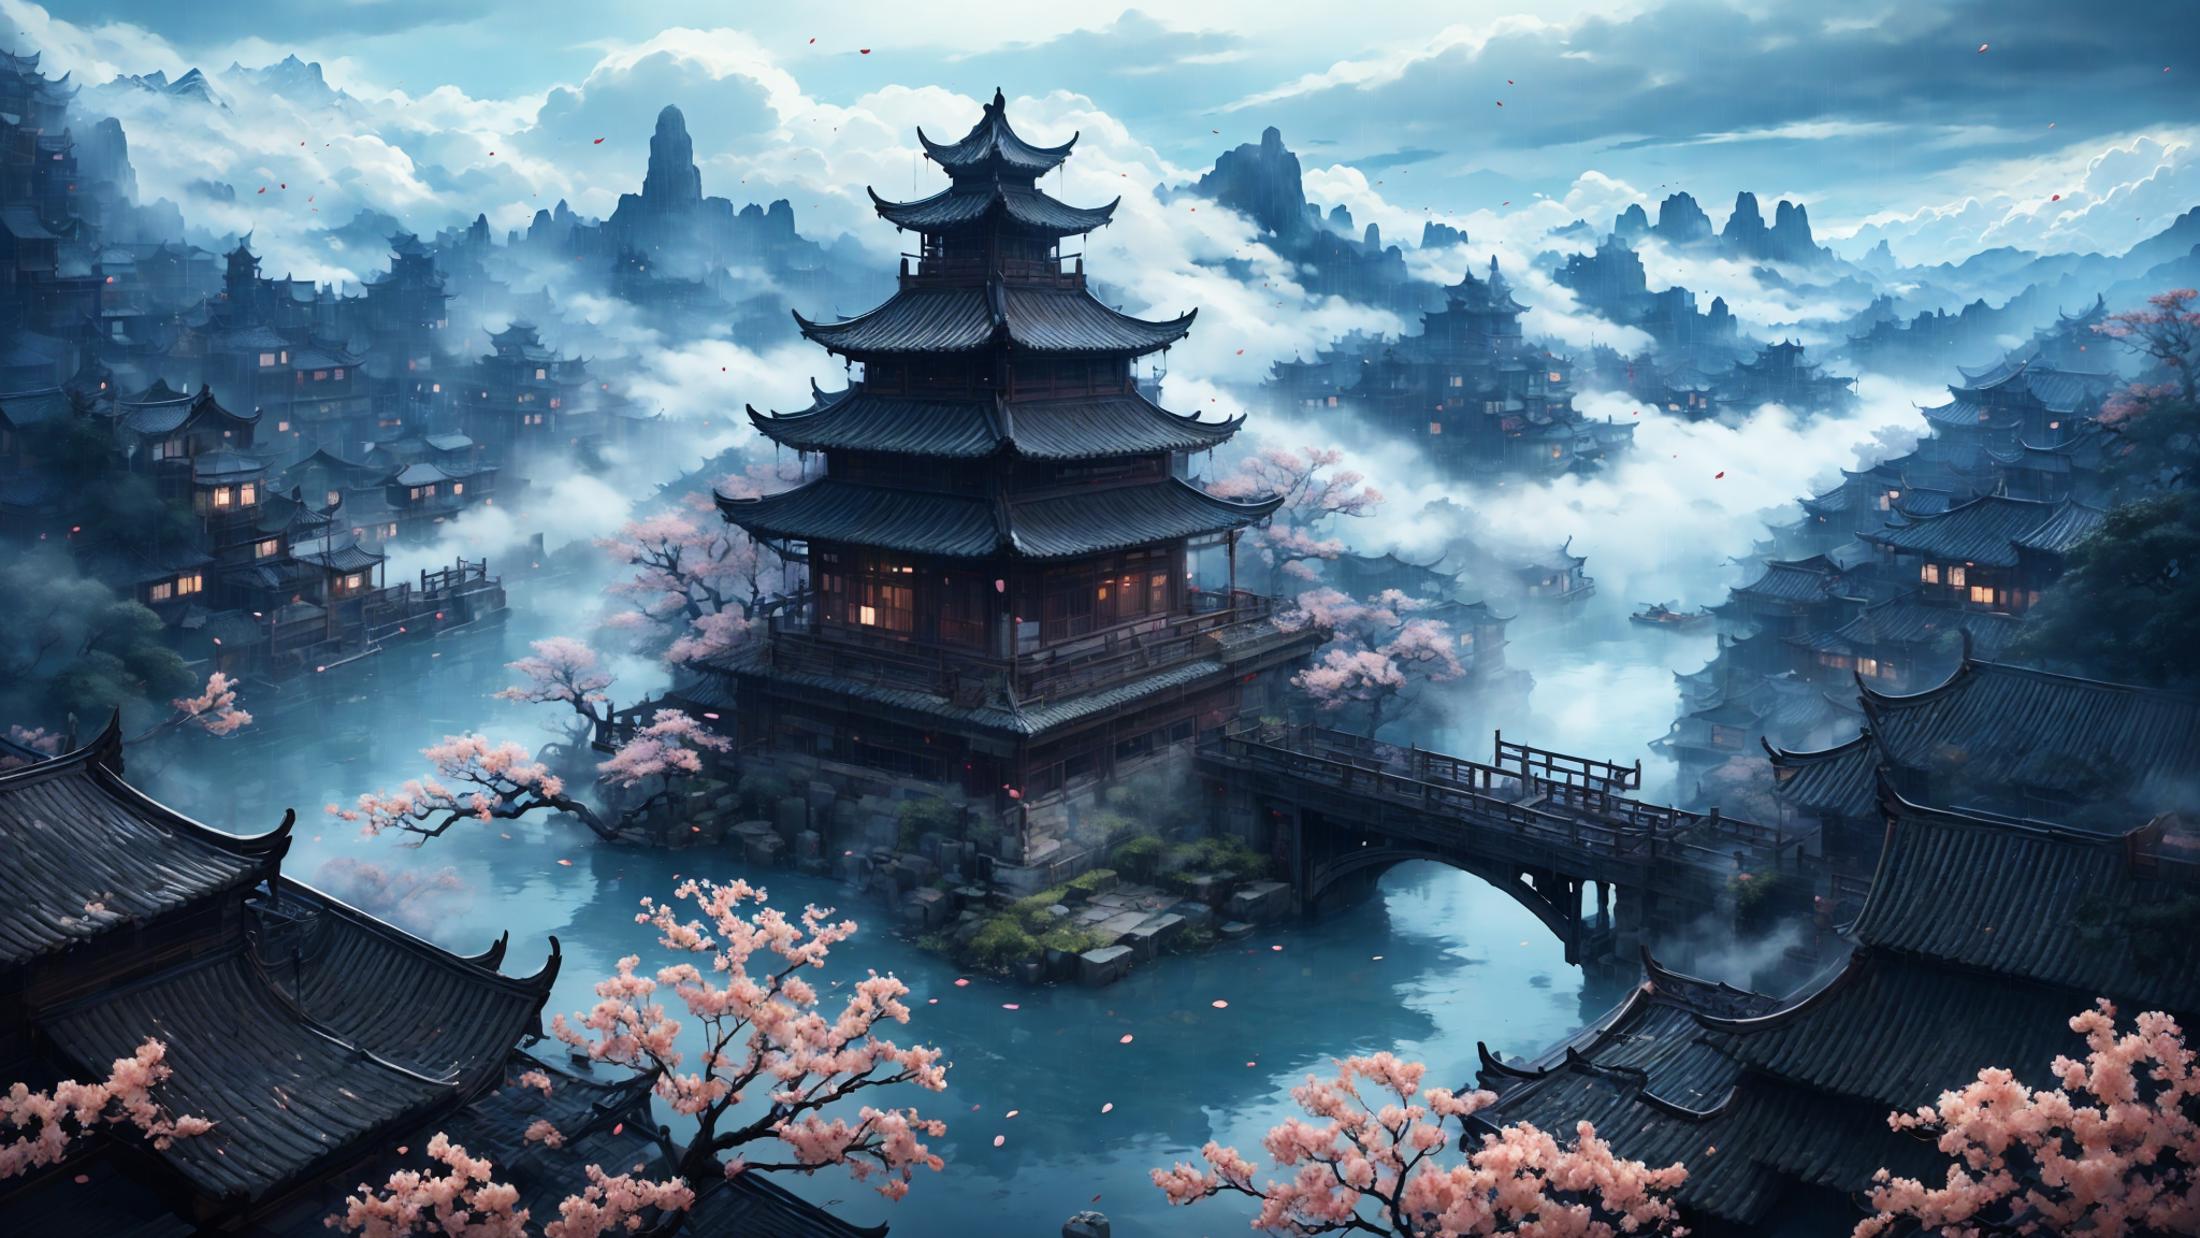 A beautiful painting of a Japanese temple with a bridge over water.